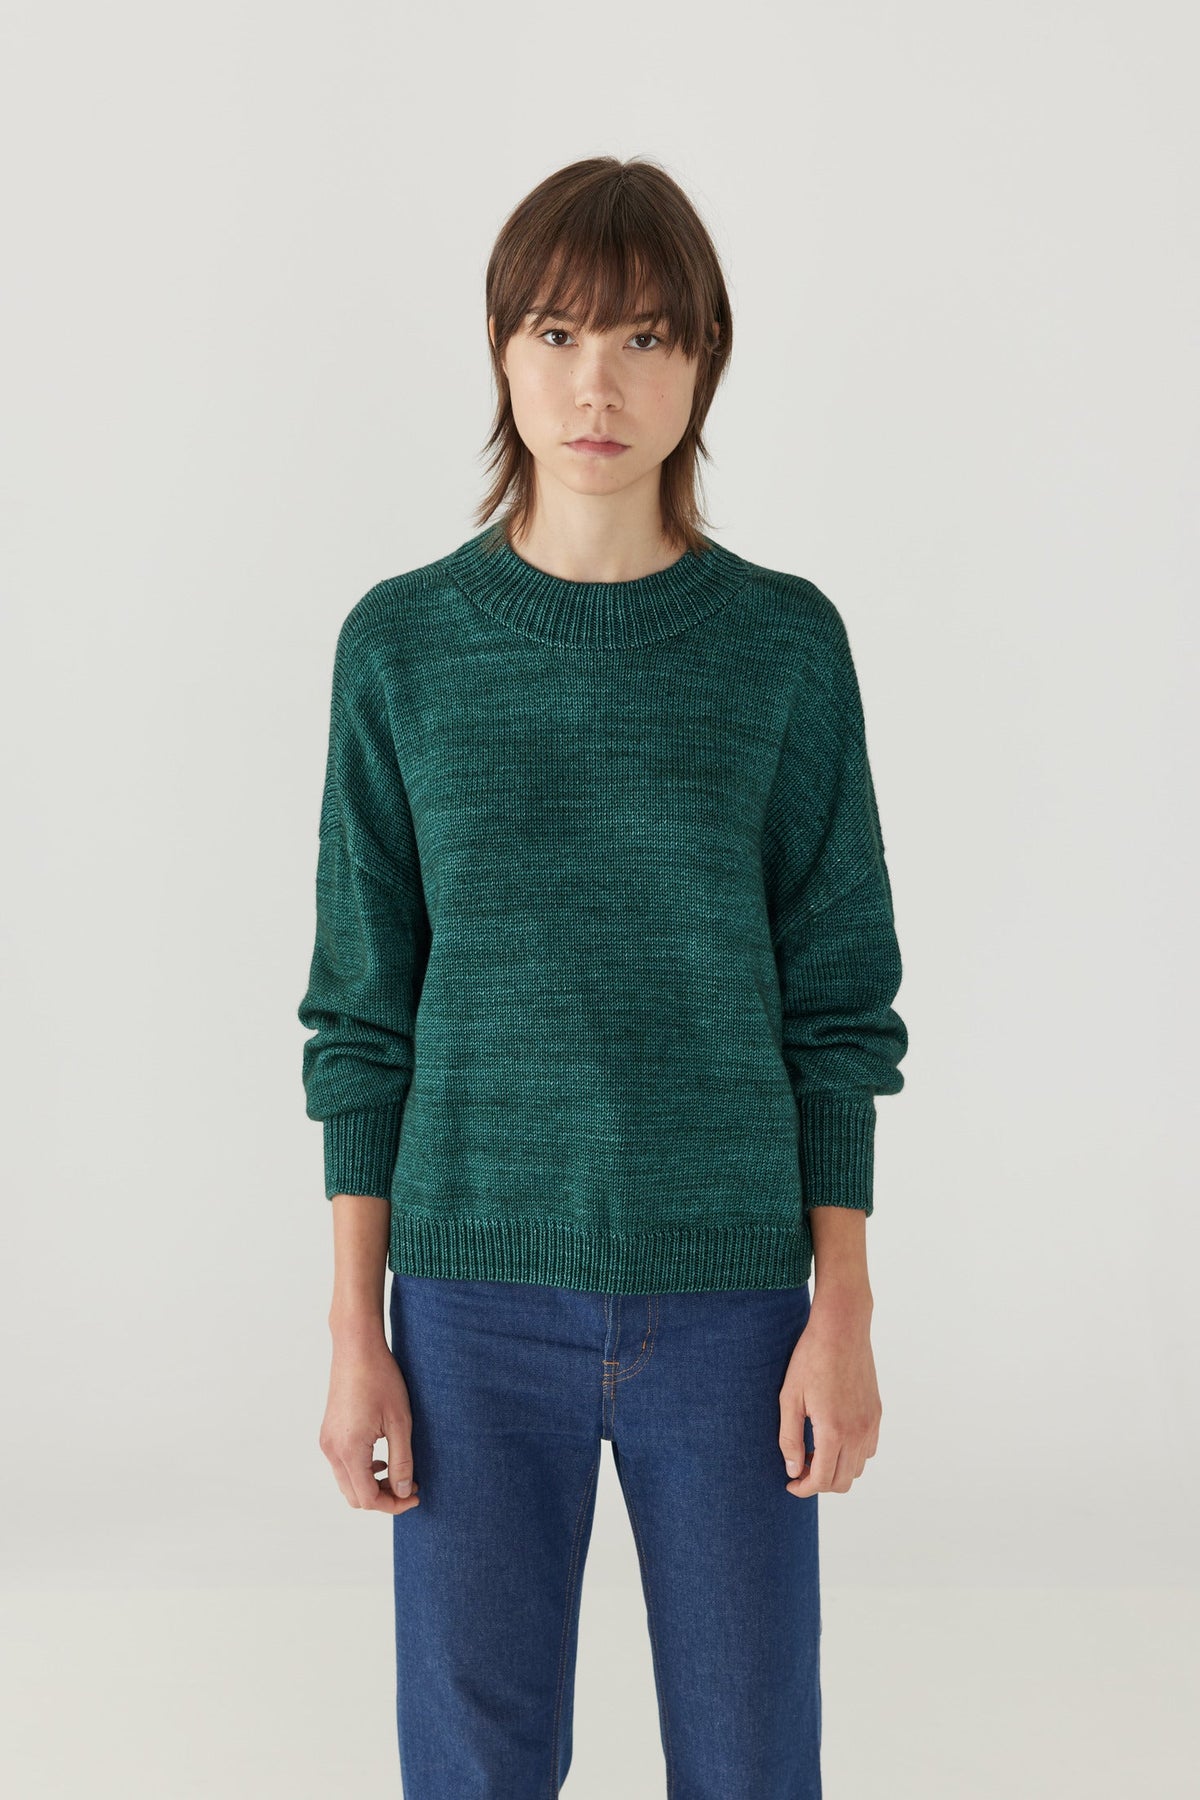 Adult Drafting Mock Neck Sweater - Peacock+Model is 6&#39;&quot; | 32&quot; Bust | 25&quot; Waist | 36.75&quot; Hips | size 2, wearing a size Large